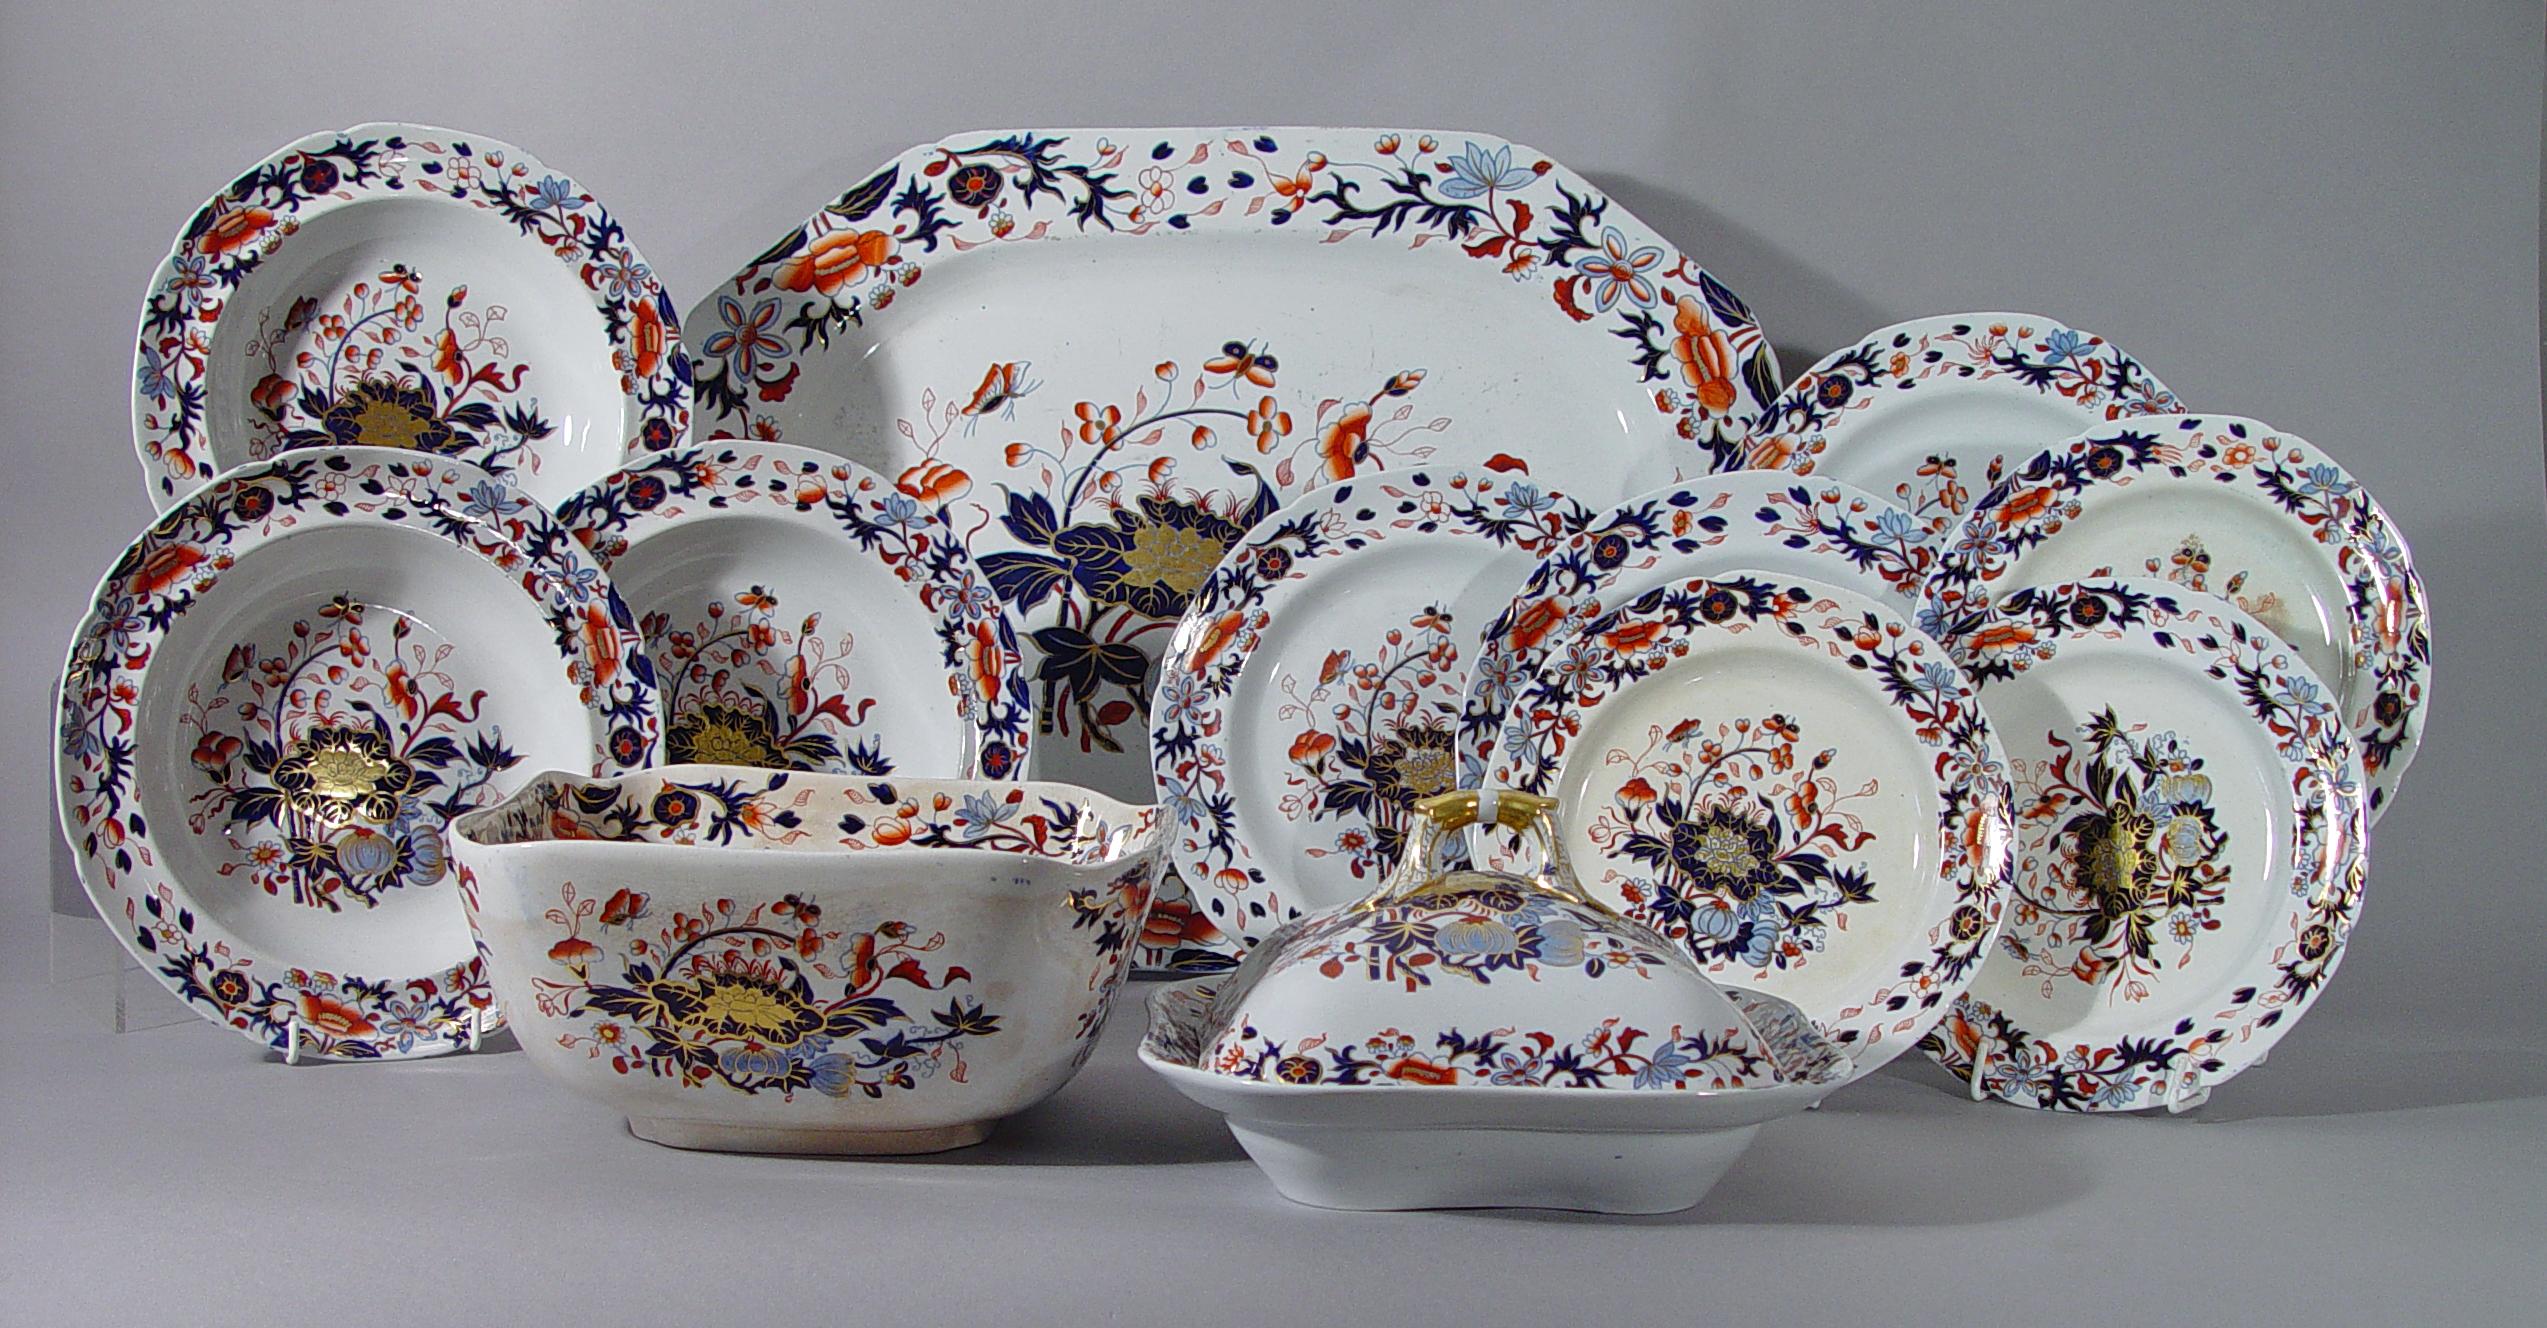 English Spode New Stone China Dinner Service Eighty Four Pieces, Pattern #3504 For Sale